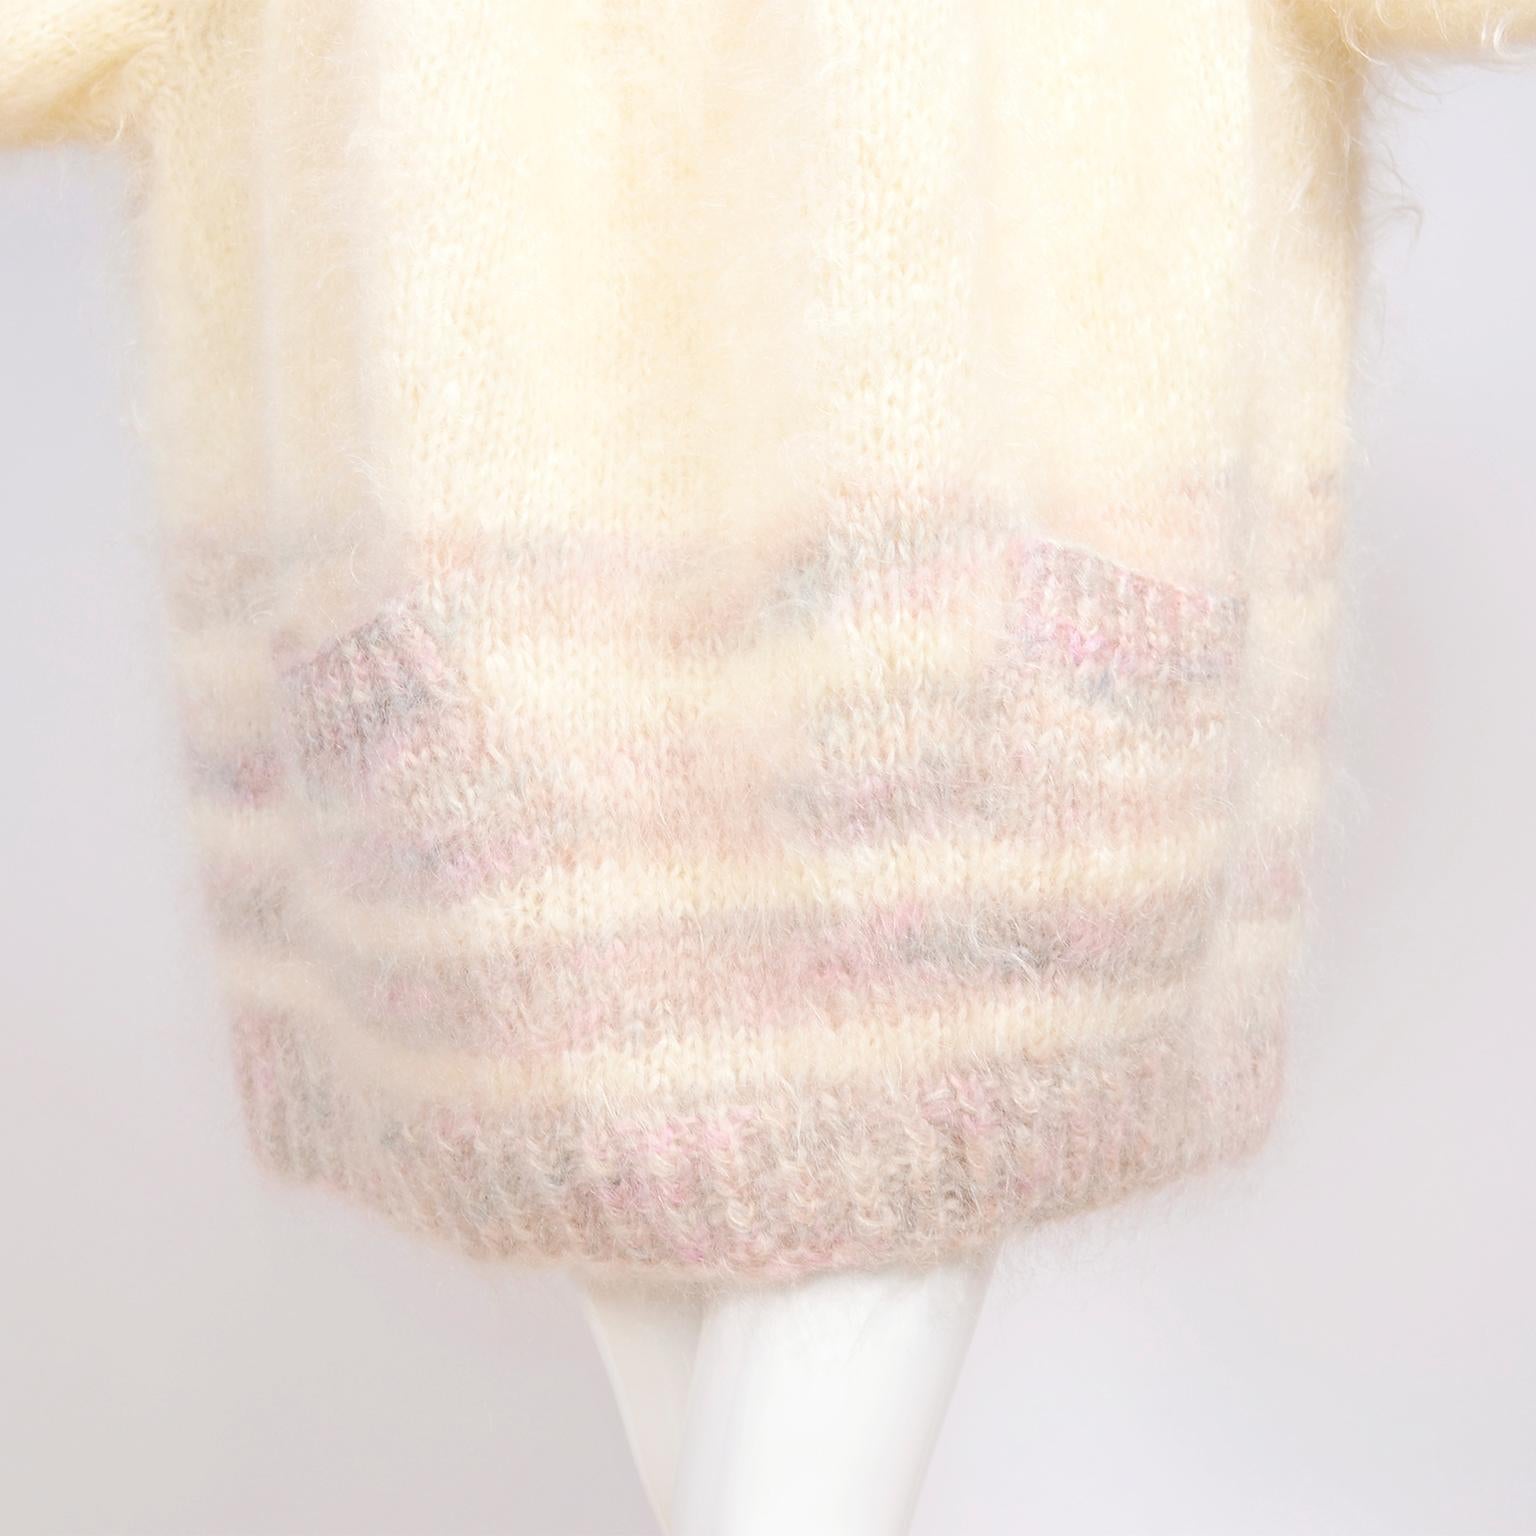 Women's 1980s Mohair Oversized Sweater or Dress With Pockets & Voluminous Sleeves